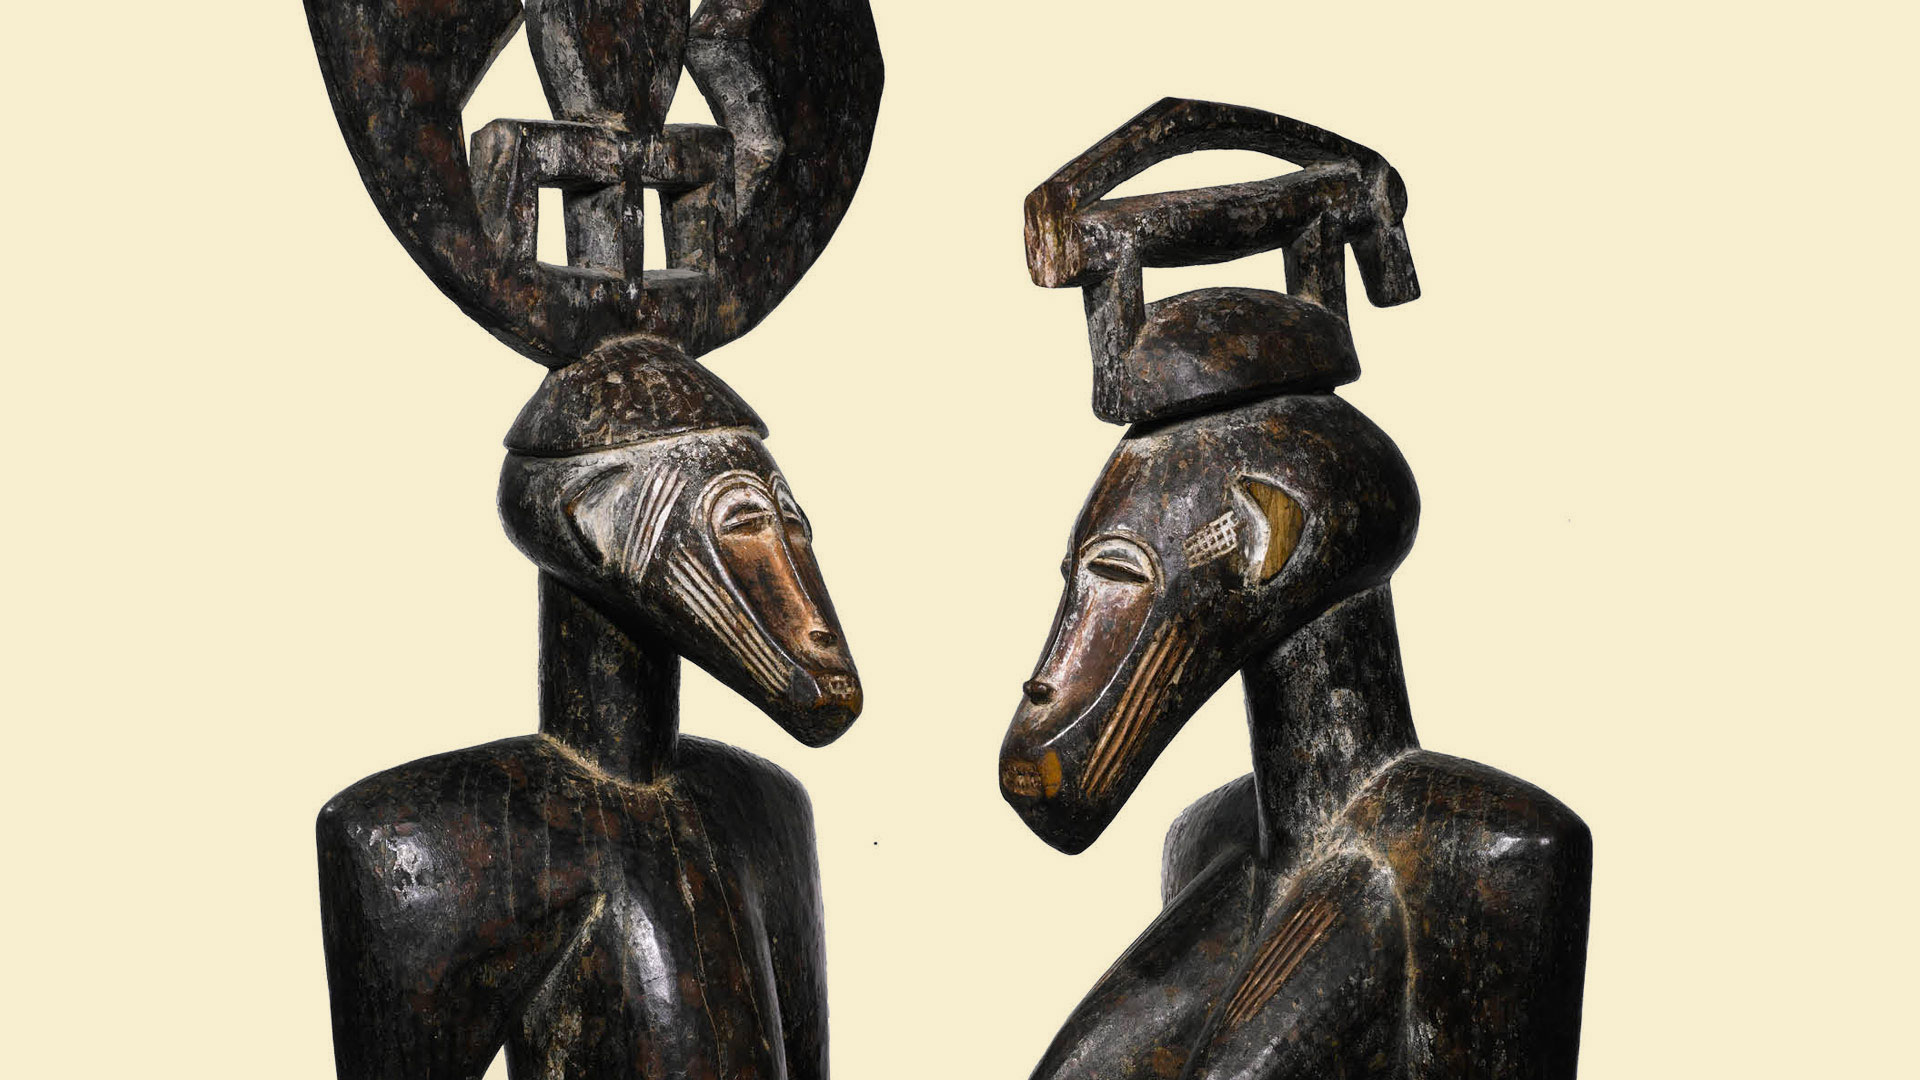 Senufo: Art and Identity in West Africa: First African Art Exhibition in 15 Years at the St. Louis Art Museum